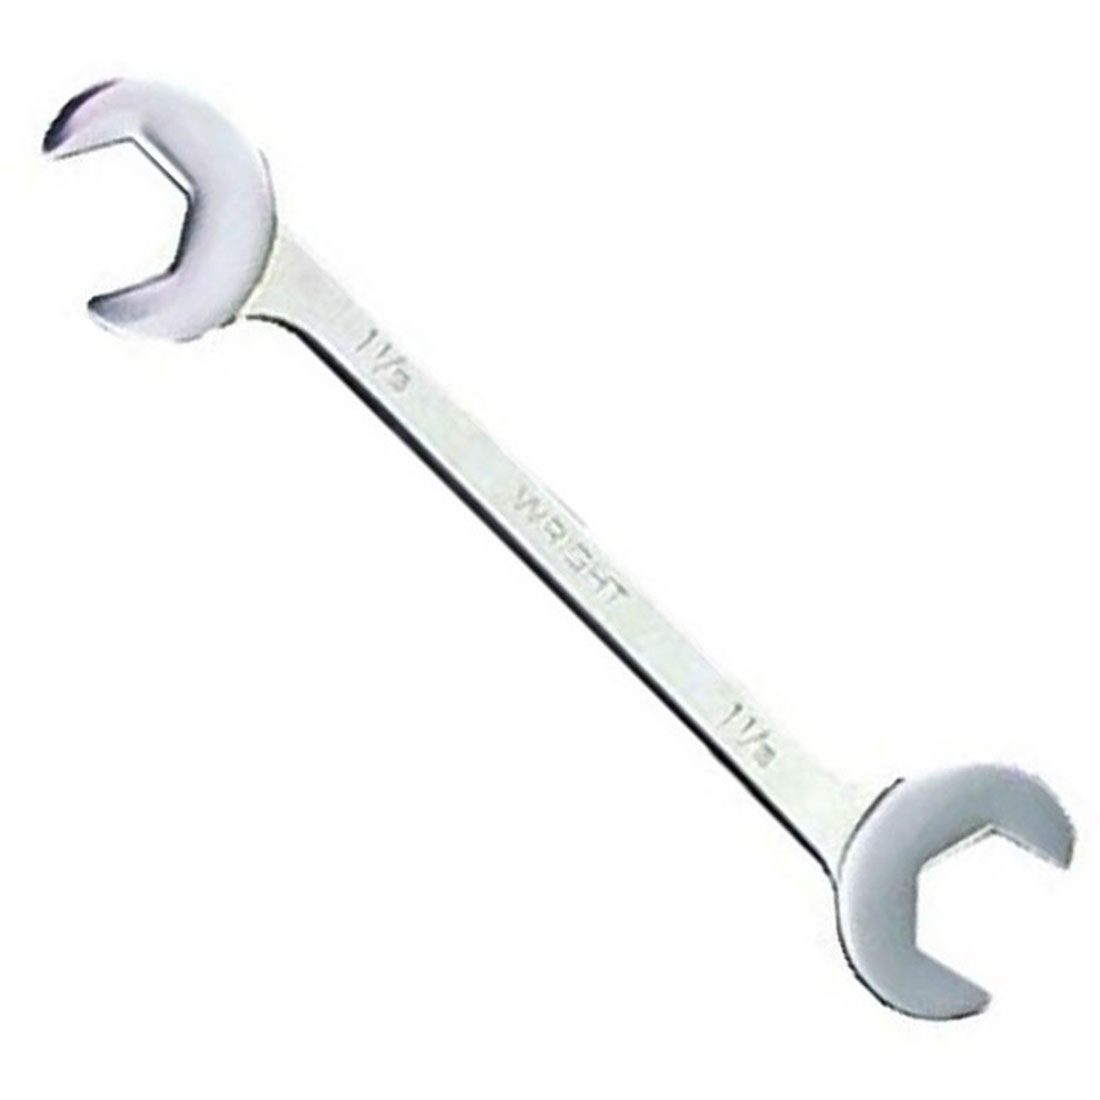 Moody Tools 76-1556 3/16 Steel Handle Open End Wrench 